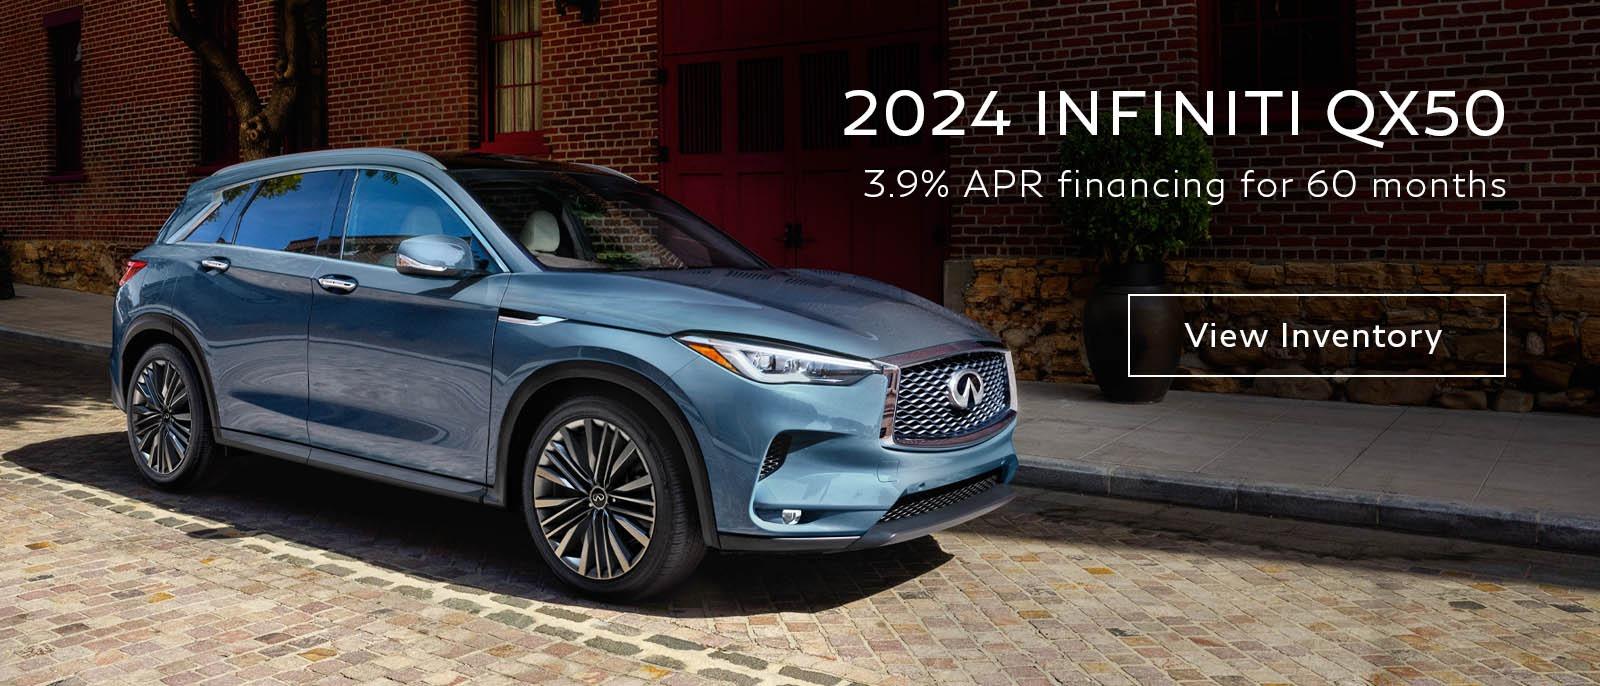 3.9% APR for 60 months on 2024 QX50